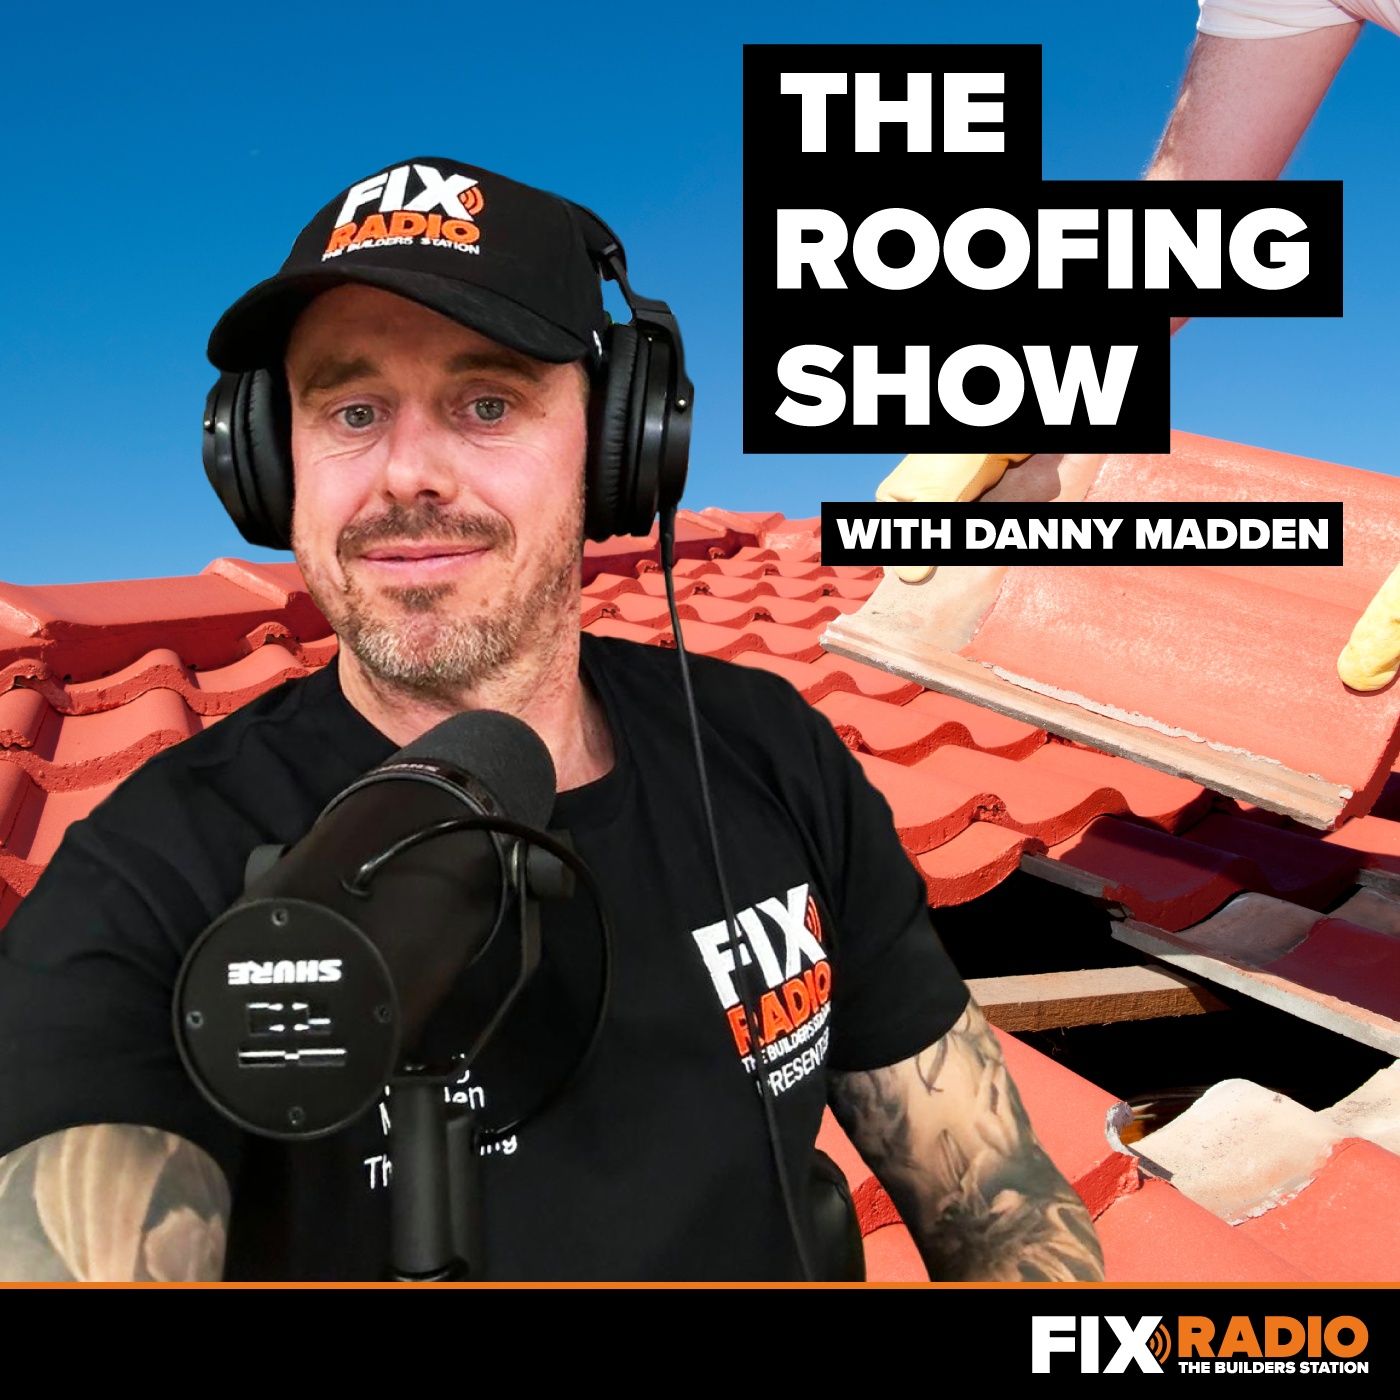 The Roofing Show